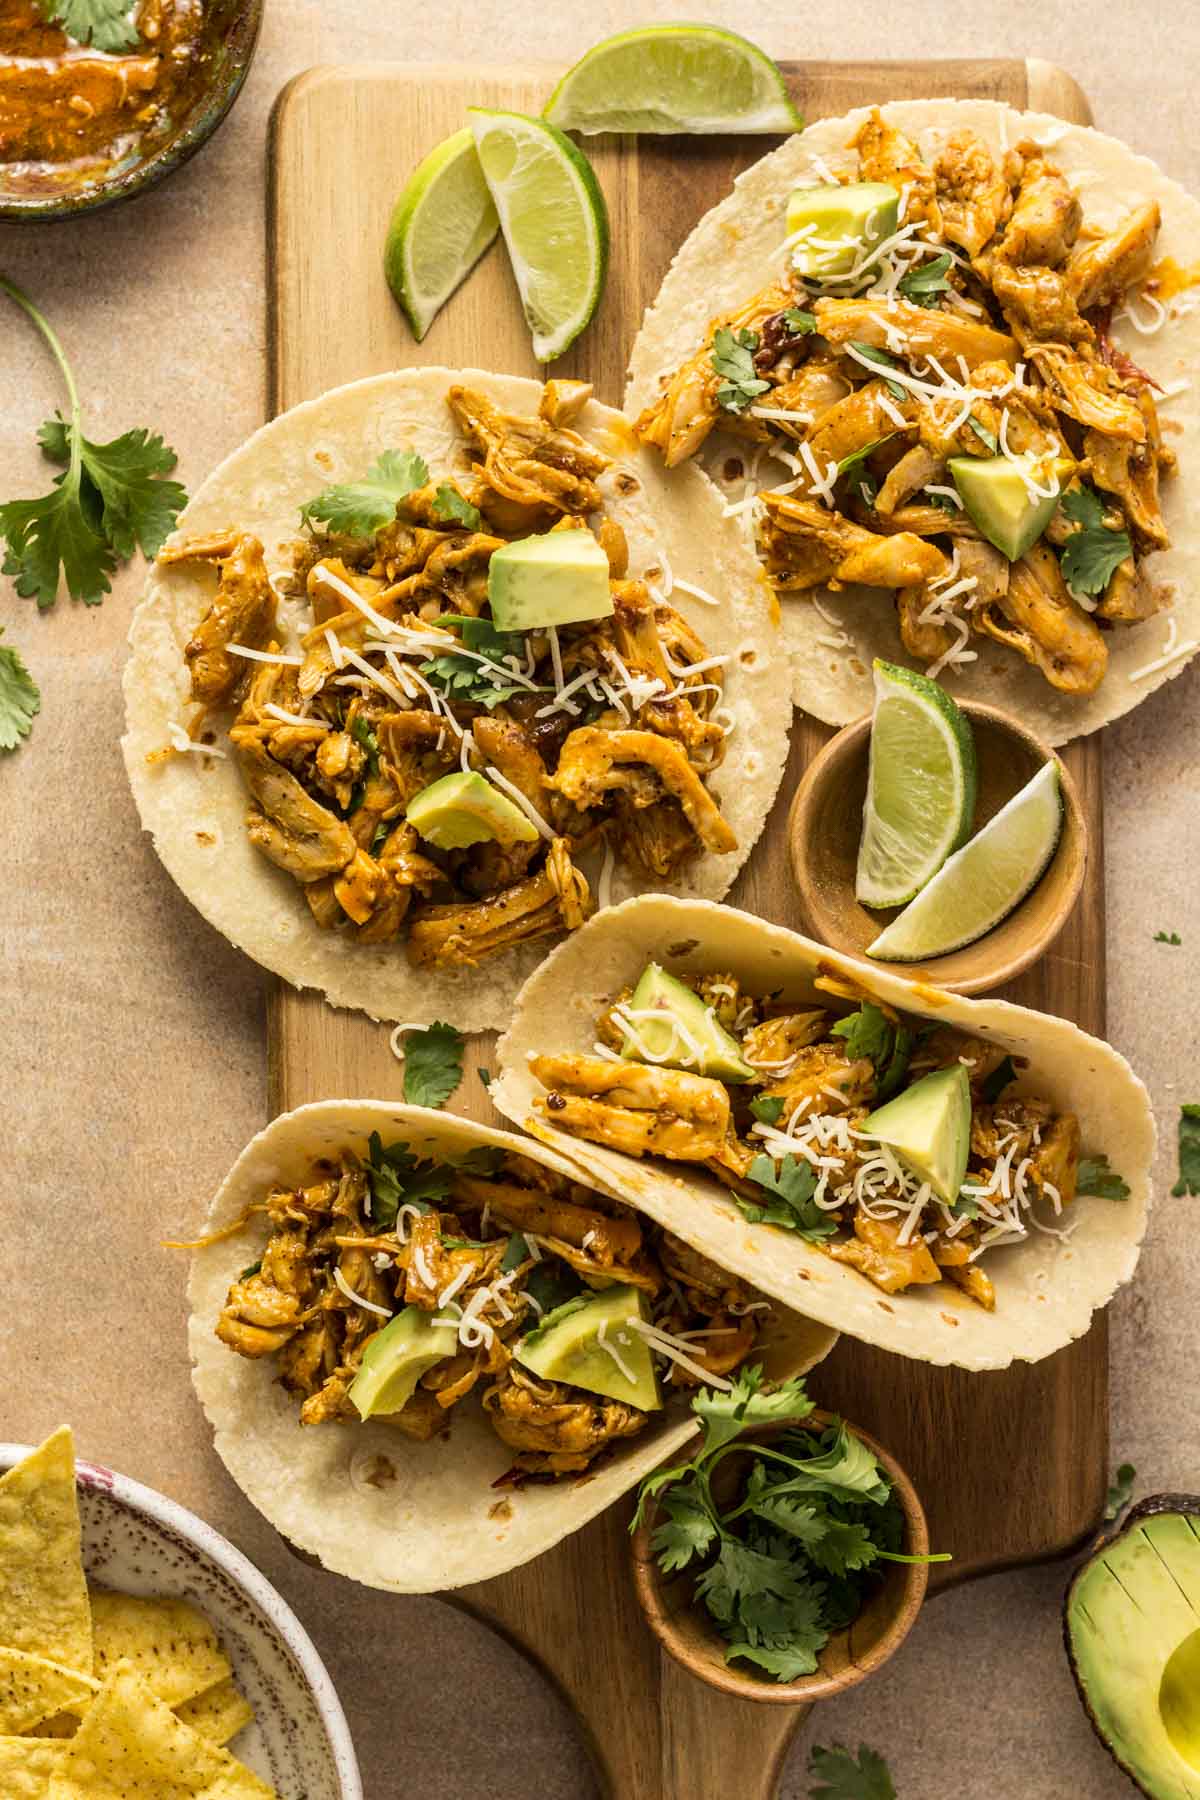 Chipotle chicken tacos with limes on a cutting board